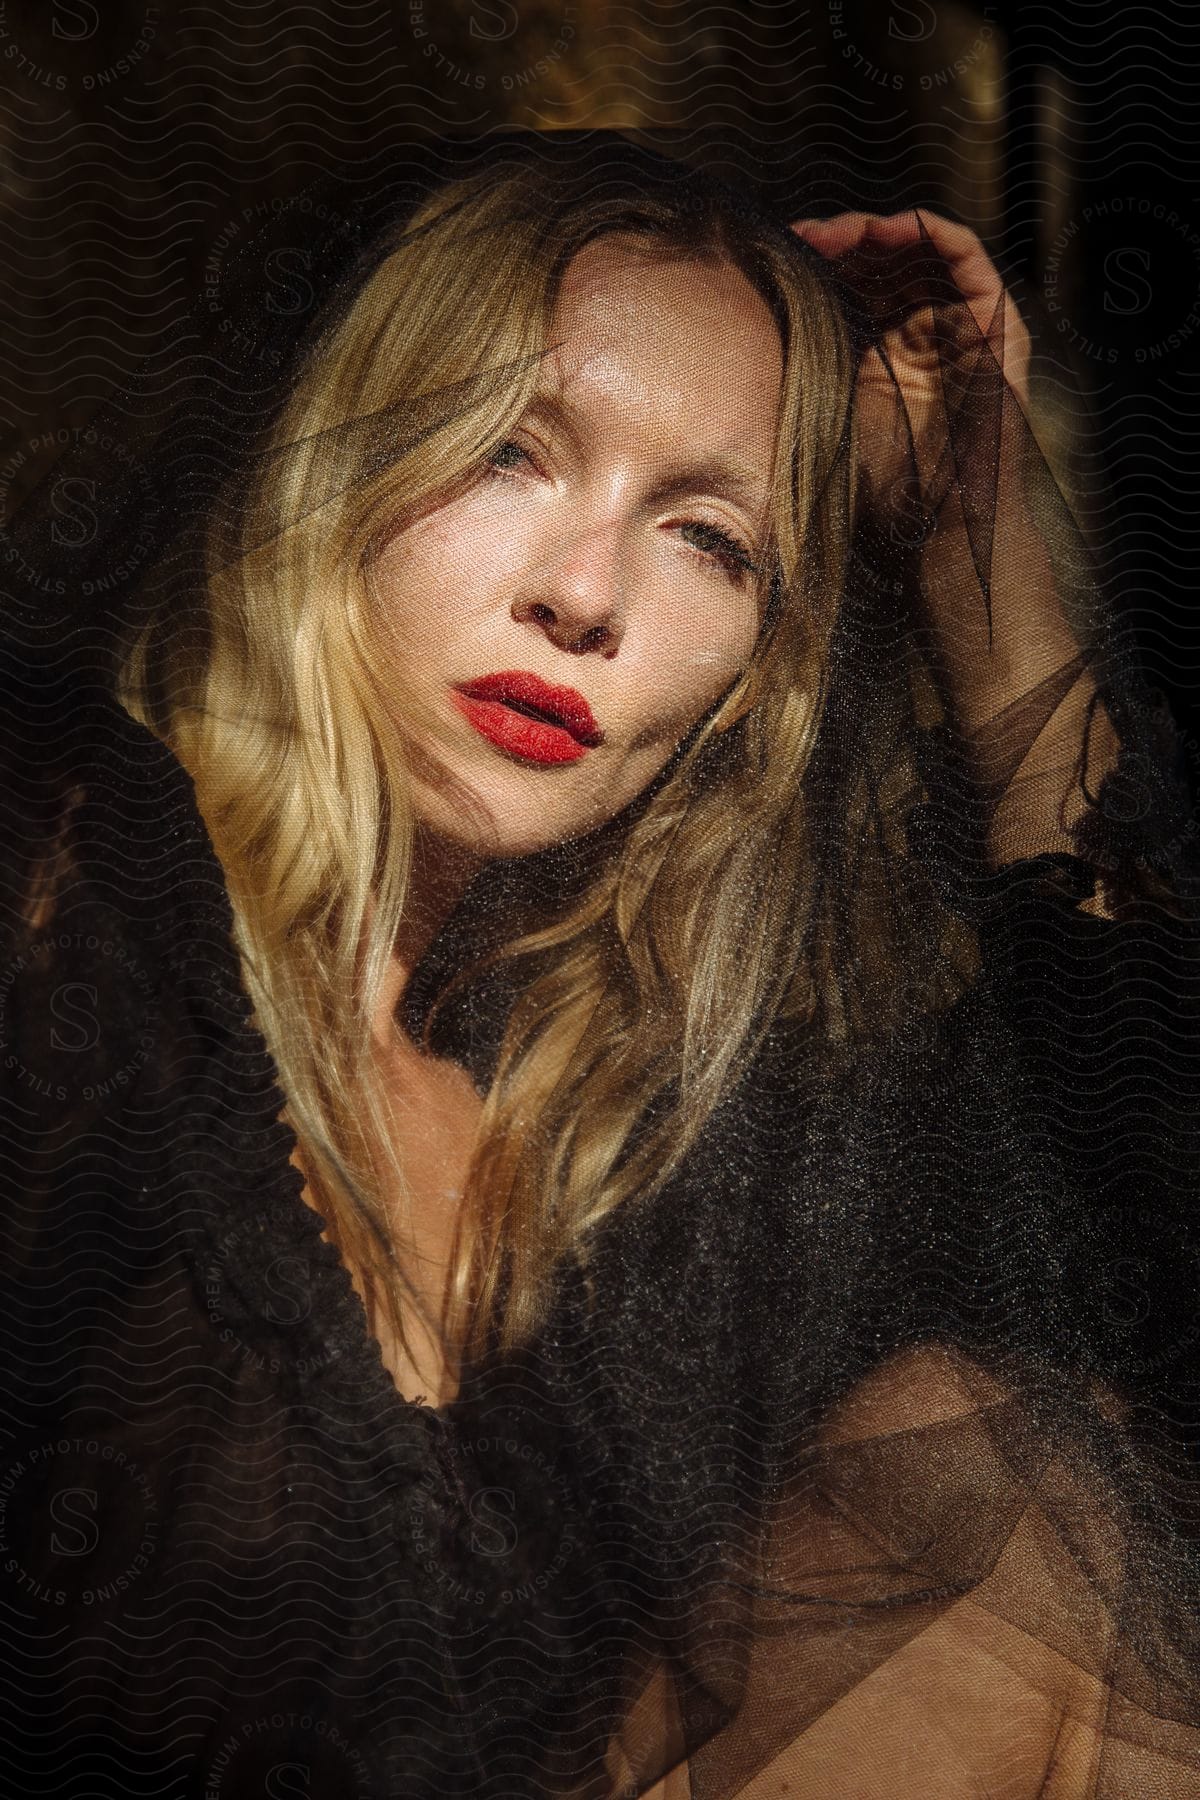 Light shines on the face of a blonde haired woman wearing red lipstick and a black laced dress